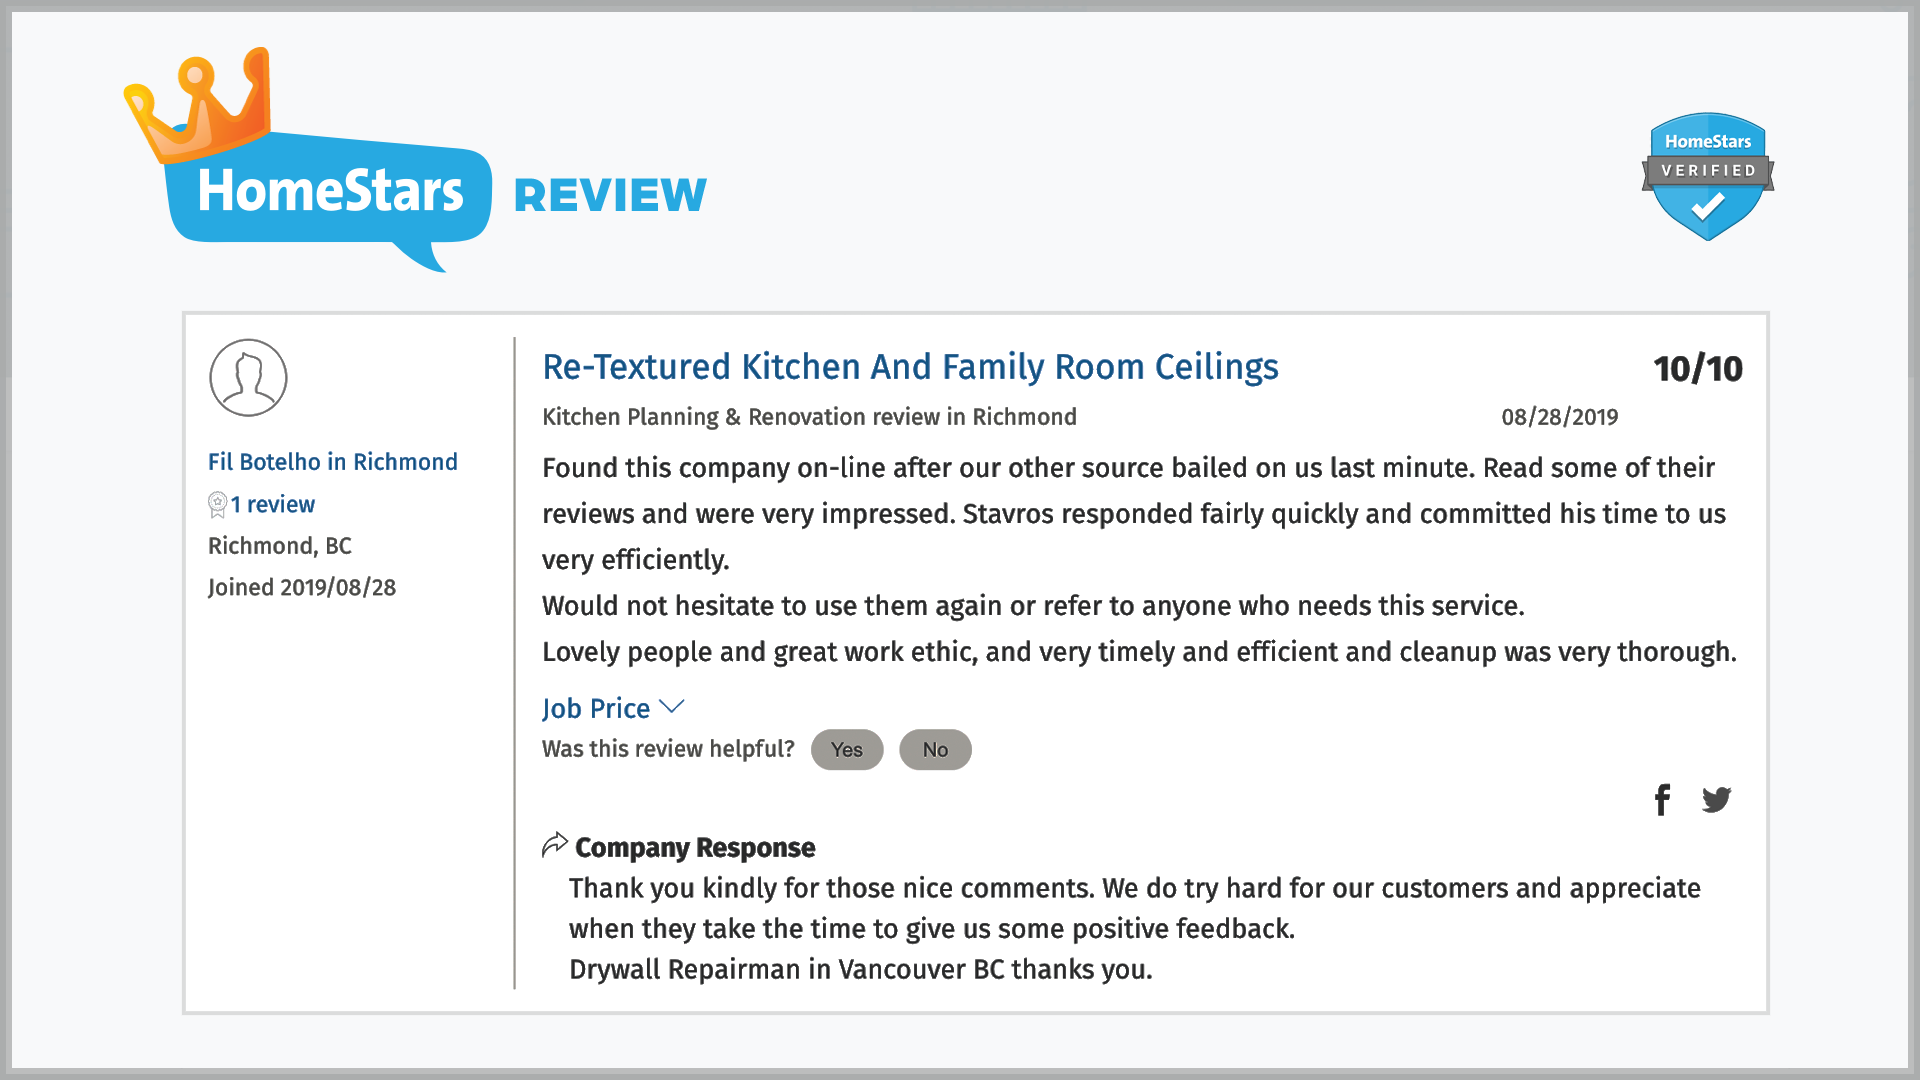 homestars-review-10-out-of-10-drywall-repairman-vancouver-bc-canada-19